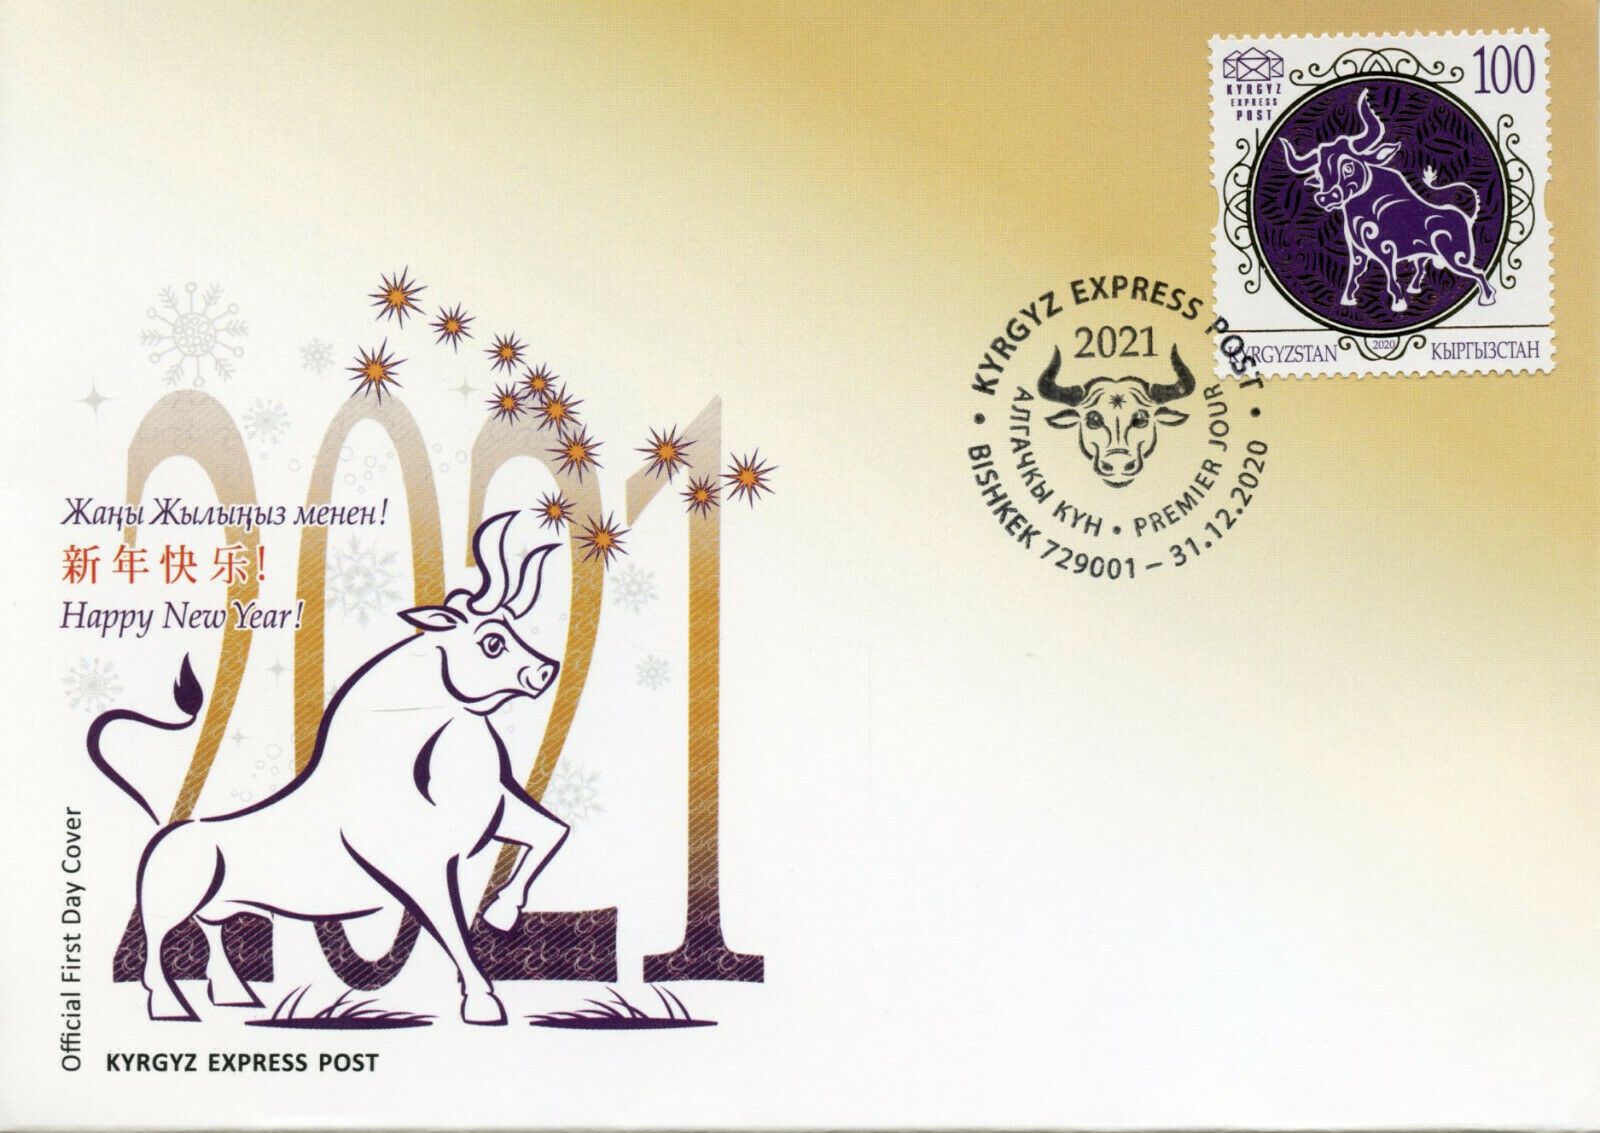 Kyrgyzstan KEP Chinese Lunar New Year Stamps 2020 FDC Year of Ox 2021 1v Set